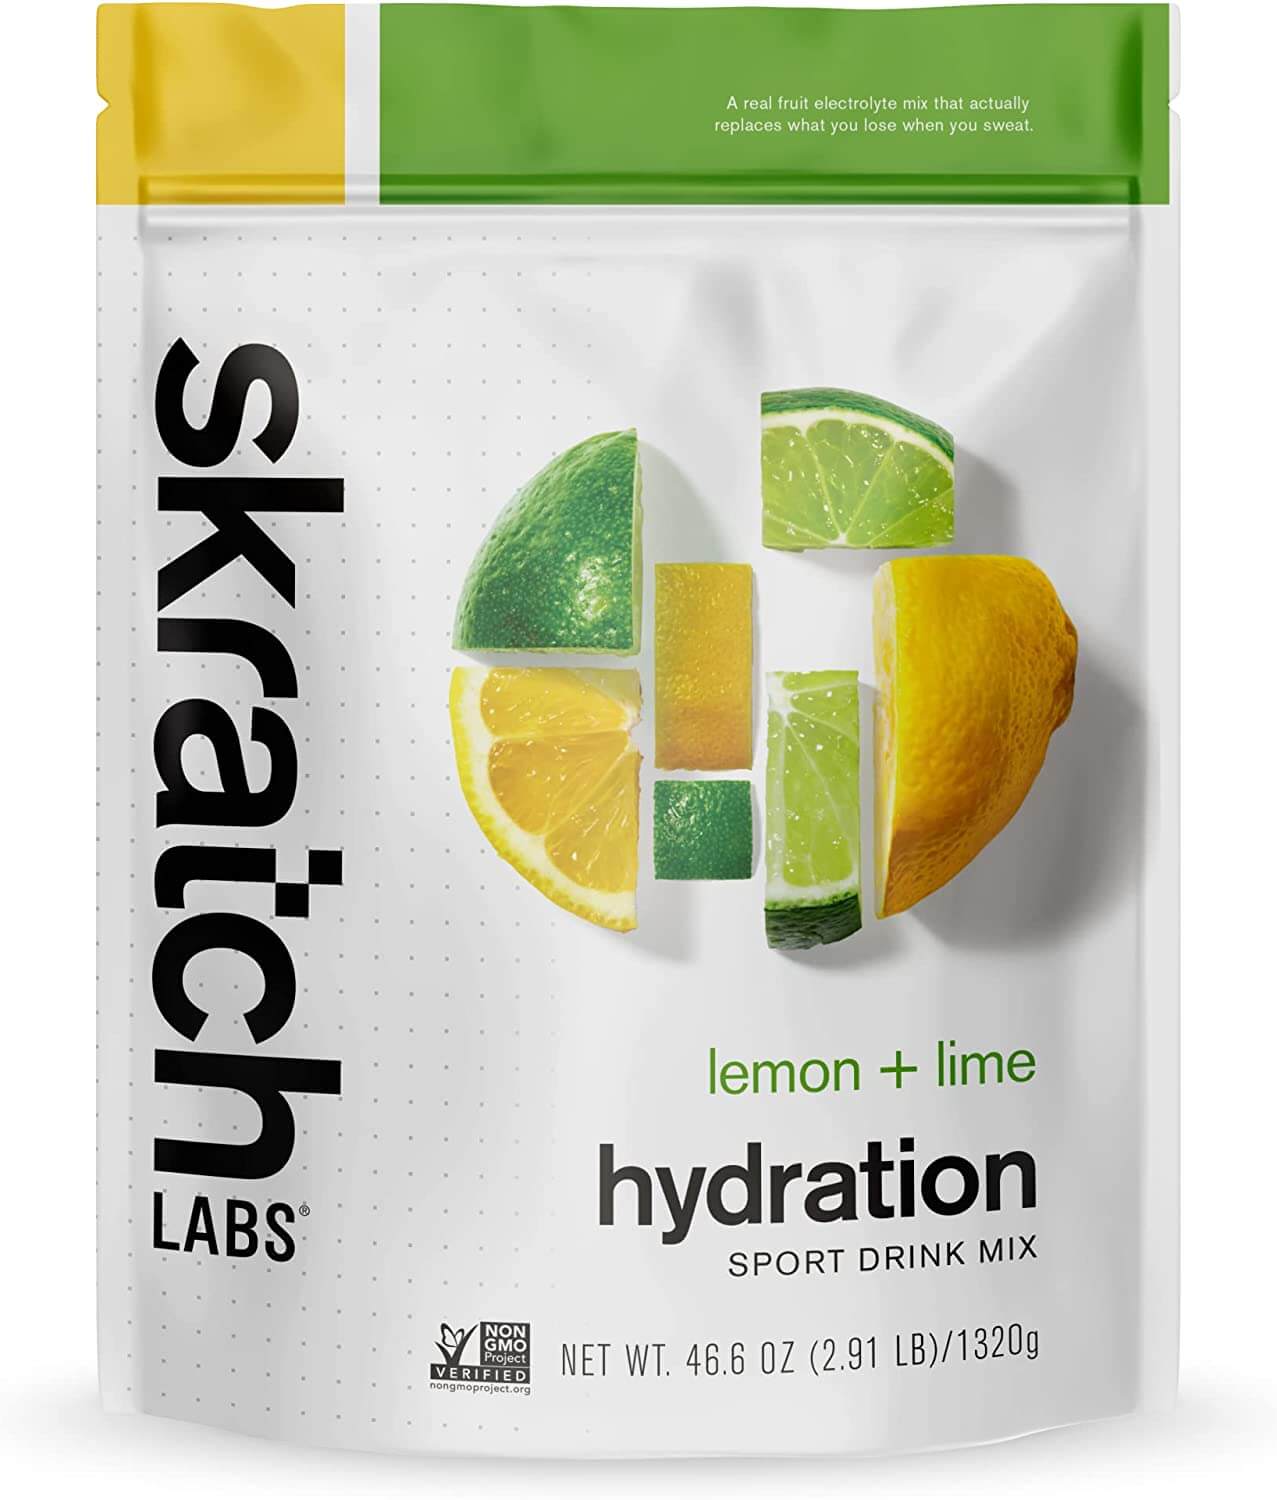 white green and yellow package with lemon and lime slices